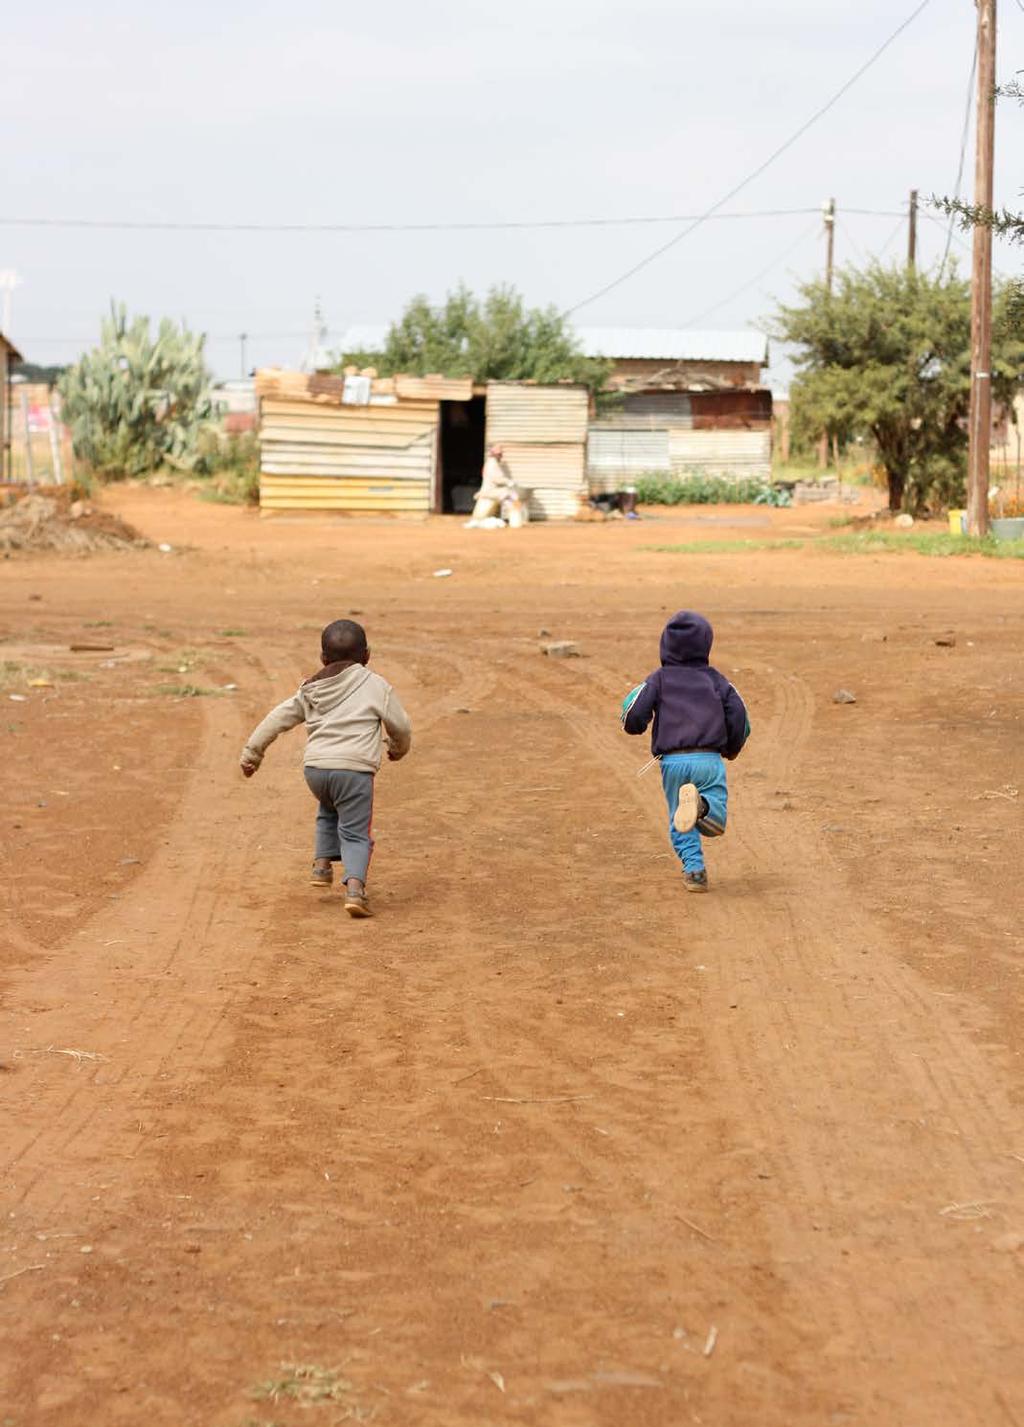 PART 1: POVERTY AND INEQUALITY IN THE GAUTENG